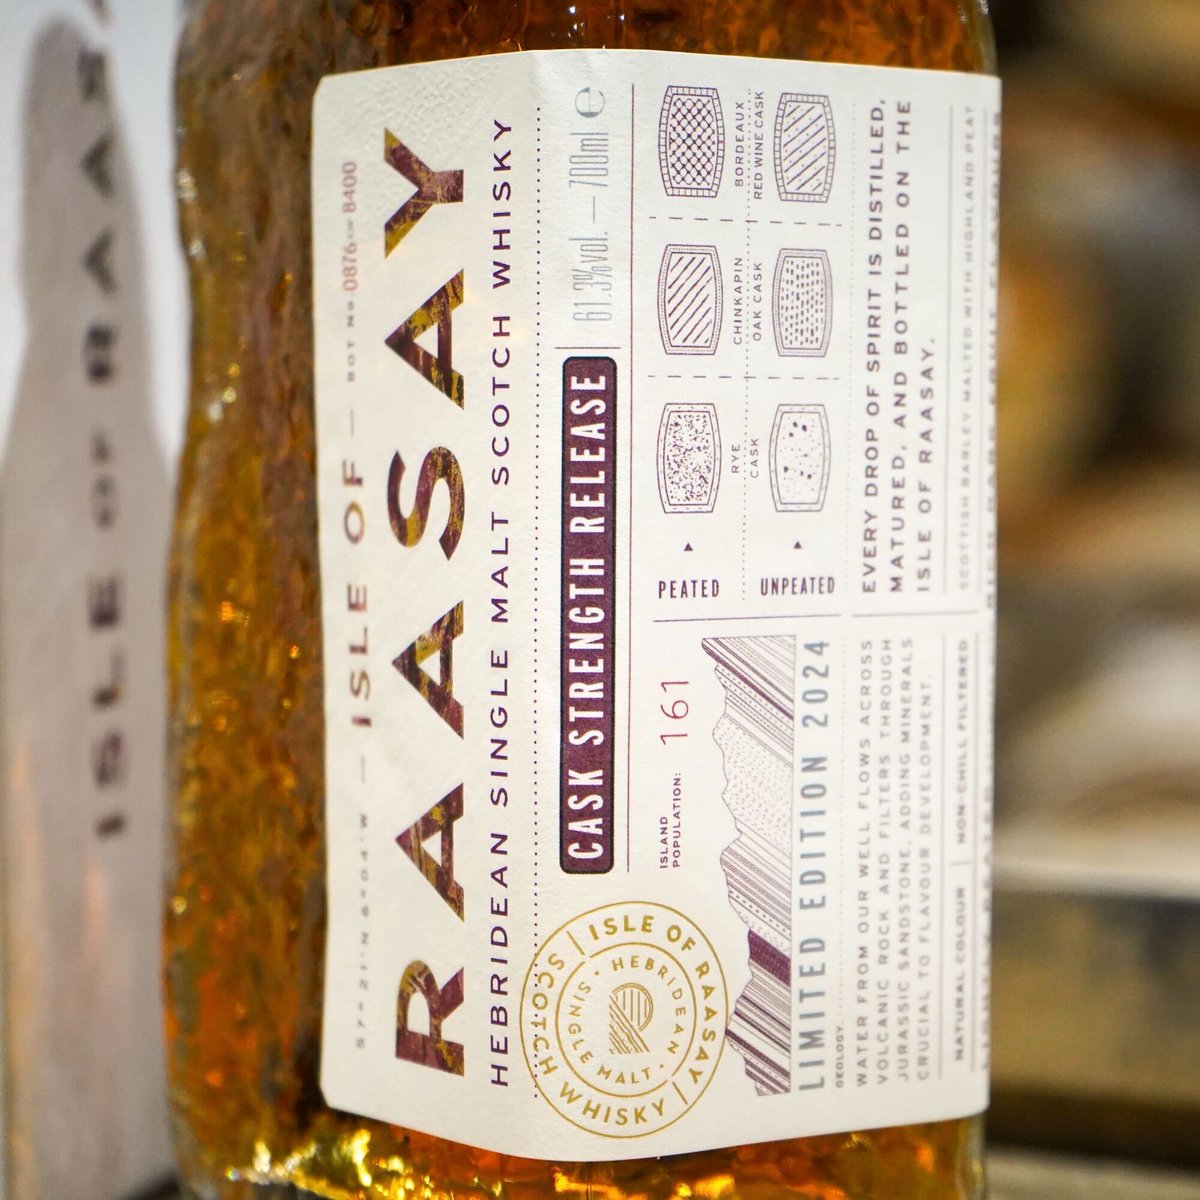 Cask Strength Release 2024 is here! We are delighted to be bringing you our Isle of Raasay Single Malt bottled at natural cask strength for maximum flavour impact. 8,500 bottles available globally at £65, head to our website to get your bottle!